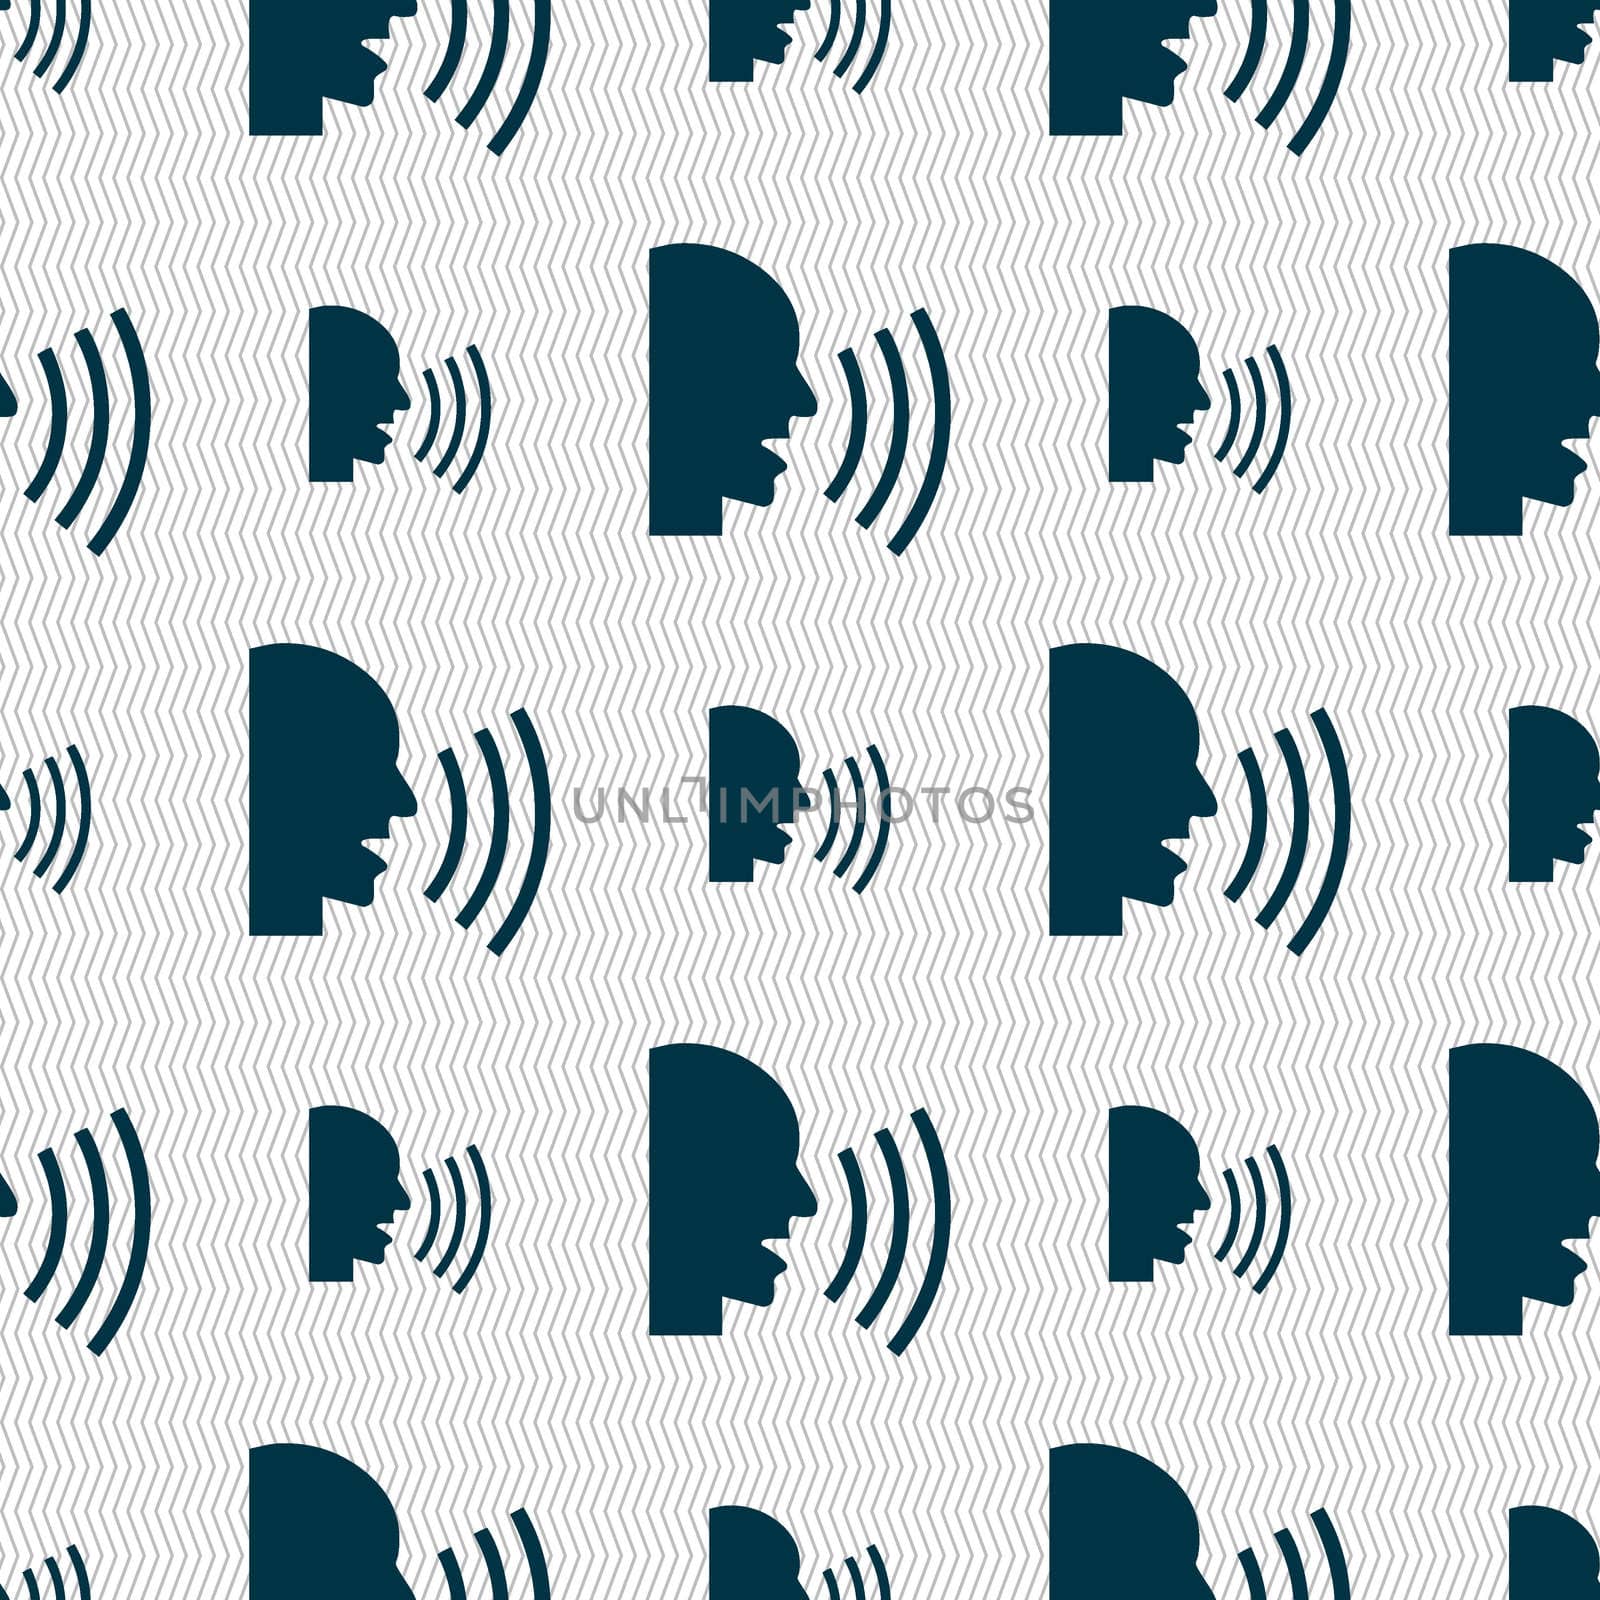 Talking Flat modern web icon. Seamless abstract background with geometric shapes. illustration